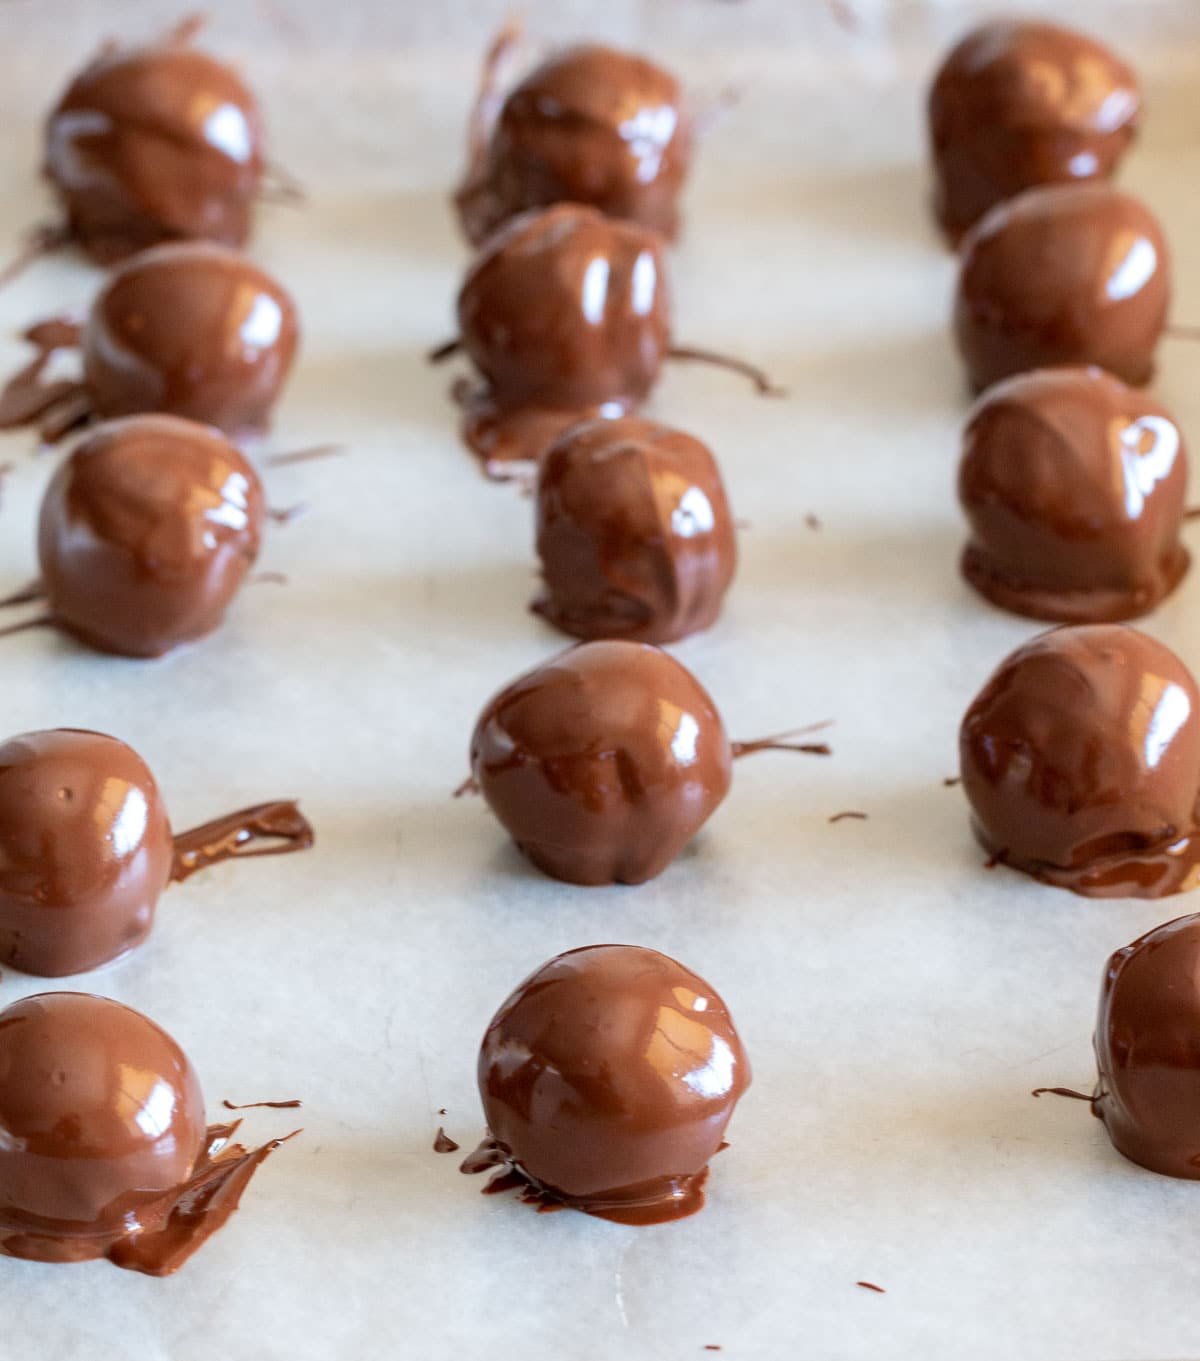 No bake mint Oreo balls freshly dipped in chocolate on a parchment lined baking tray.